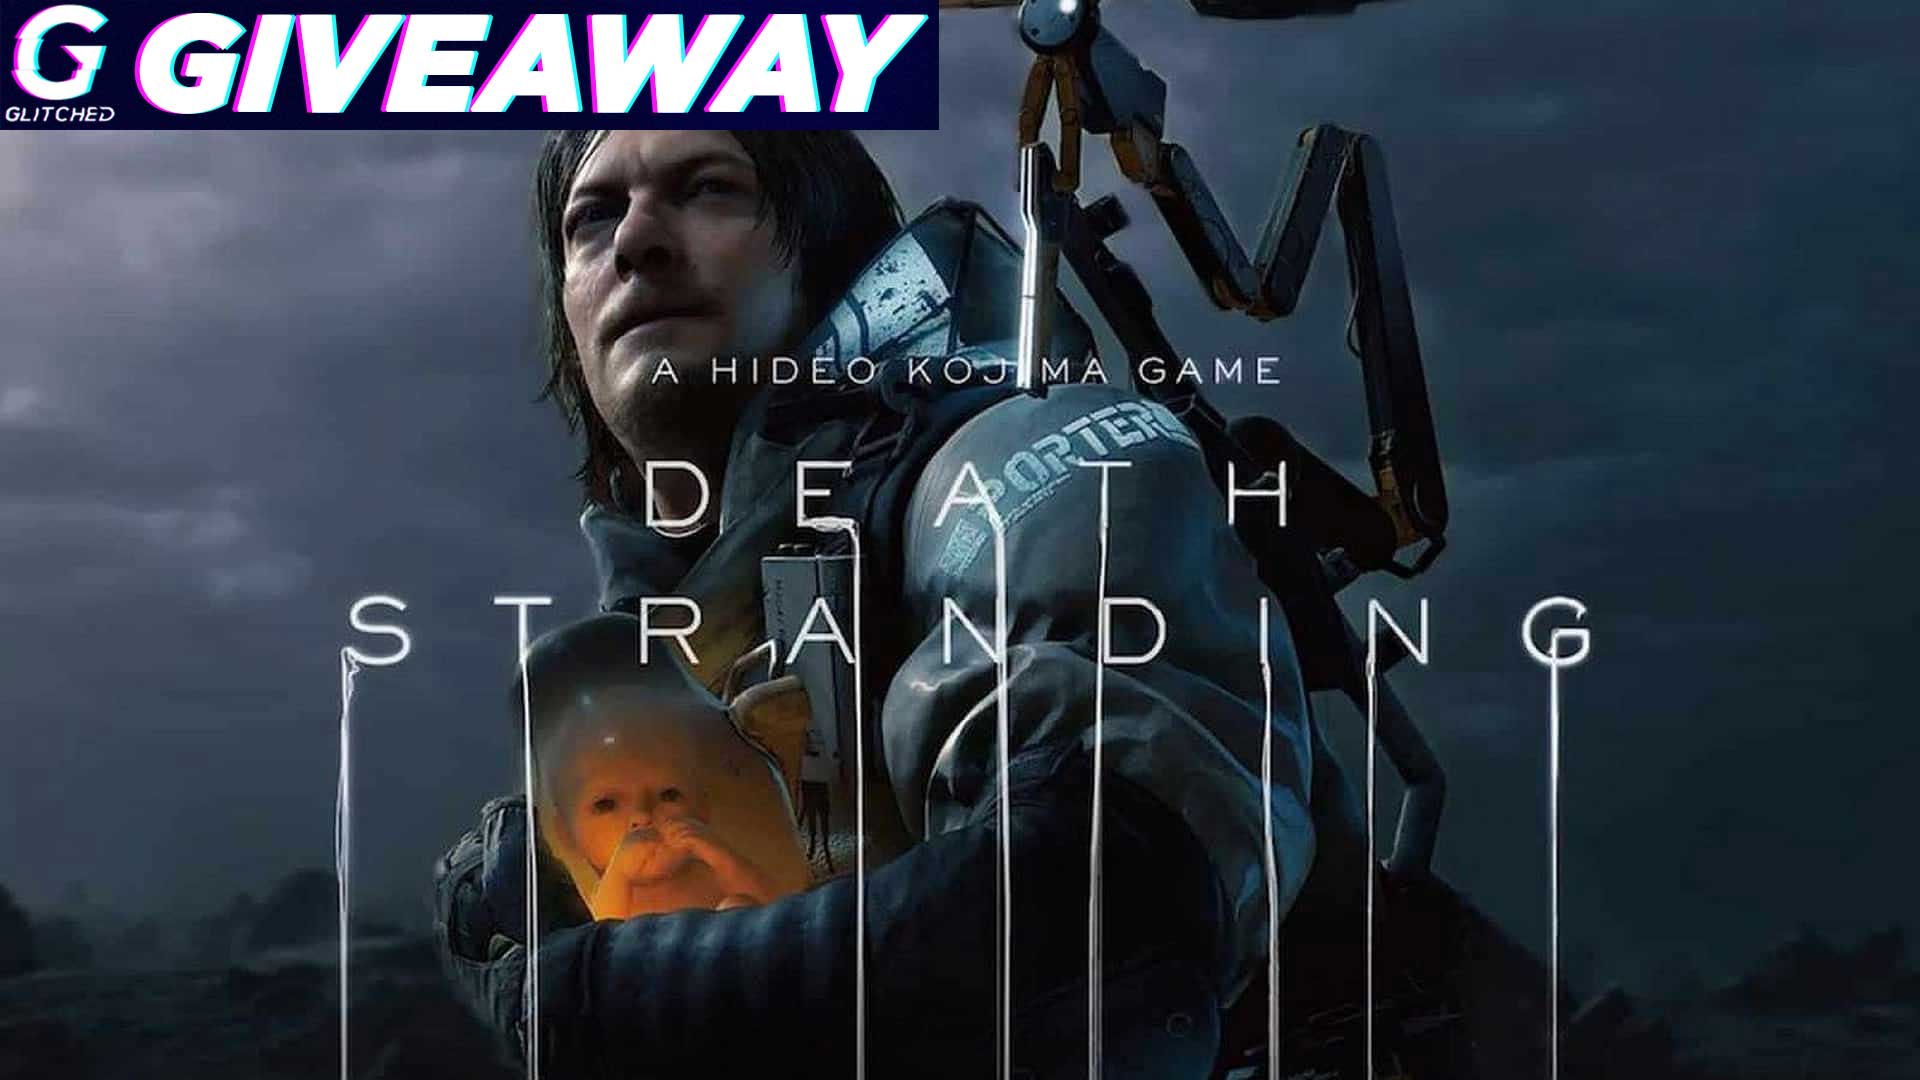 Win a Copy of Death Stranding and an Awesome Hamper